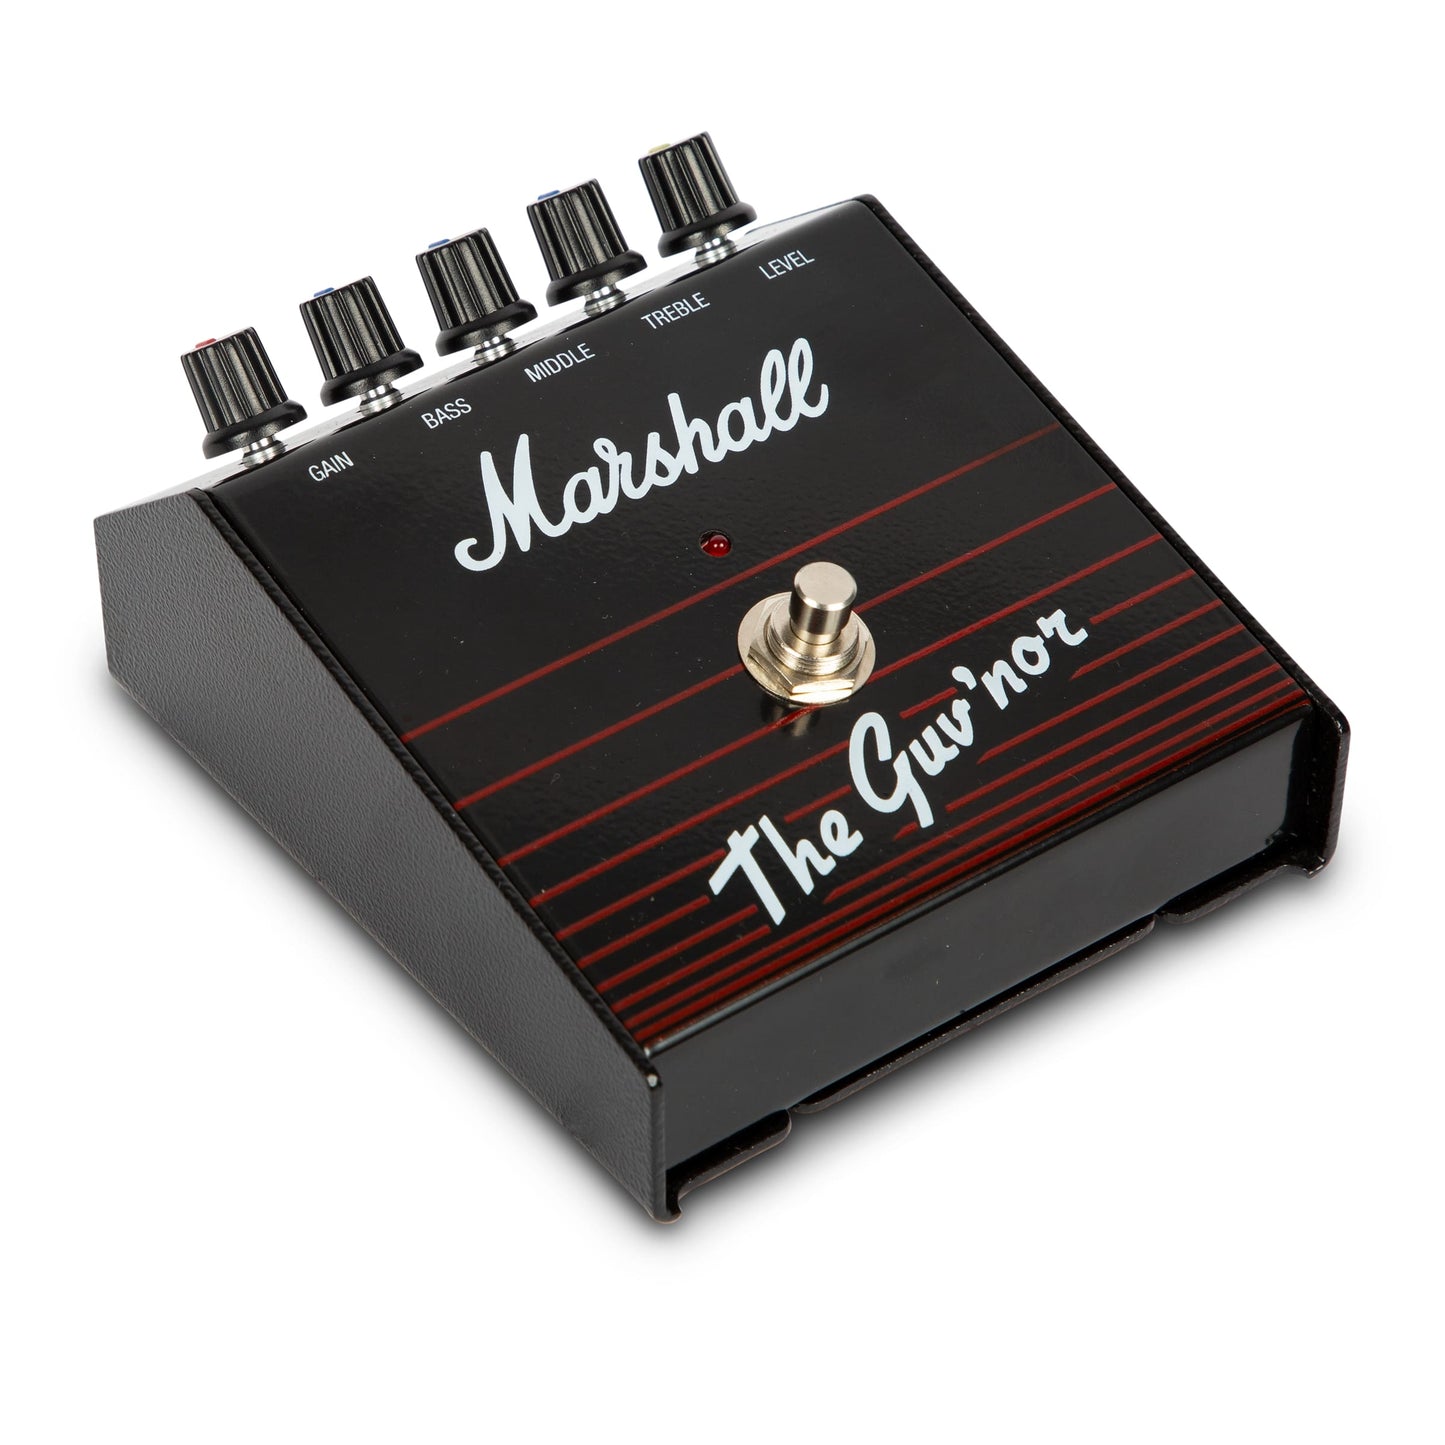 Marshall The Guv'Nor Reissue Overdrive/Distortion Pedal